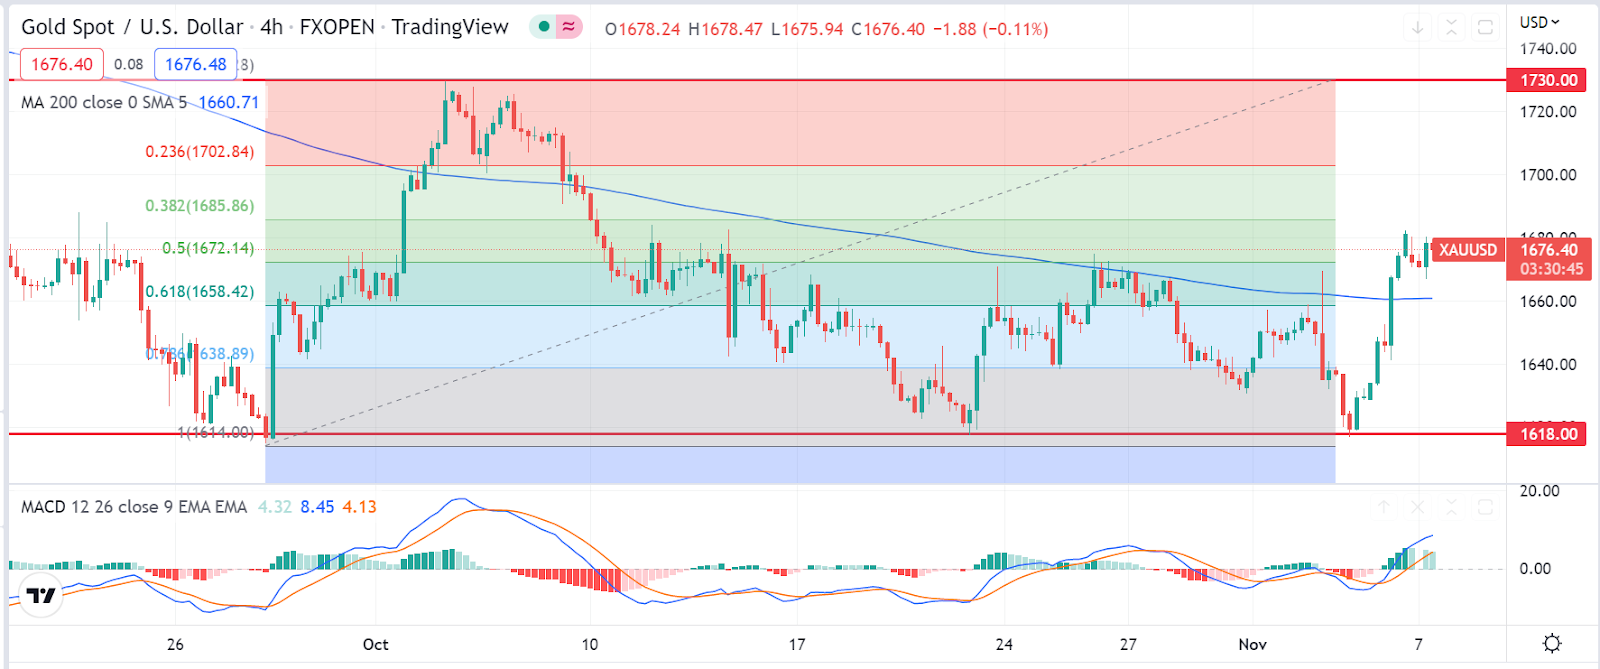 XAUUSD surge - Gold Price Forecast: XAUUSD surge near $1,682 due to DXY weakness and U.S. inflation worry